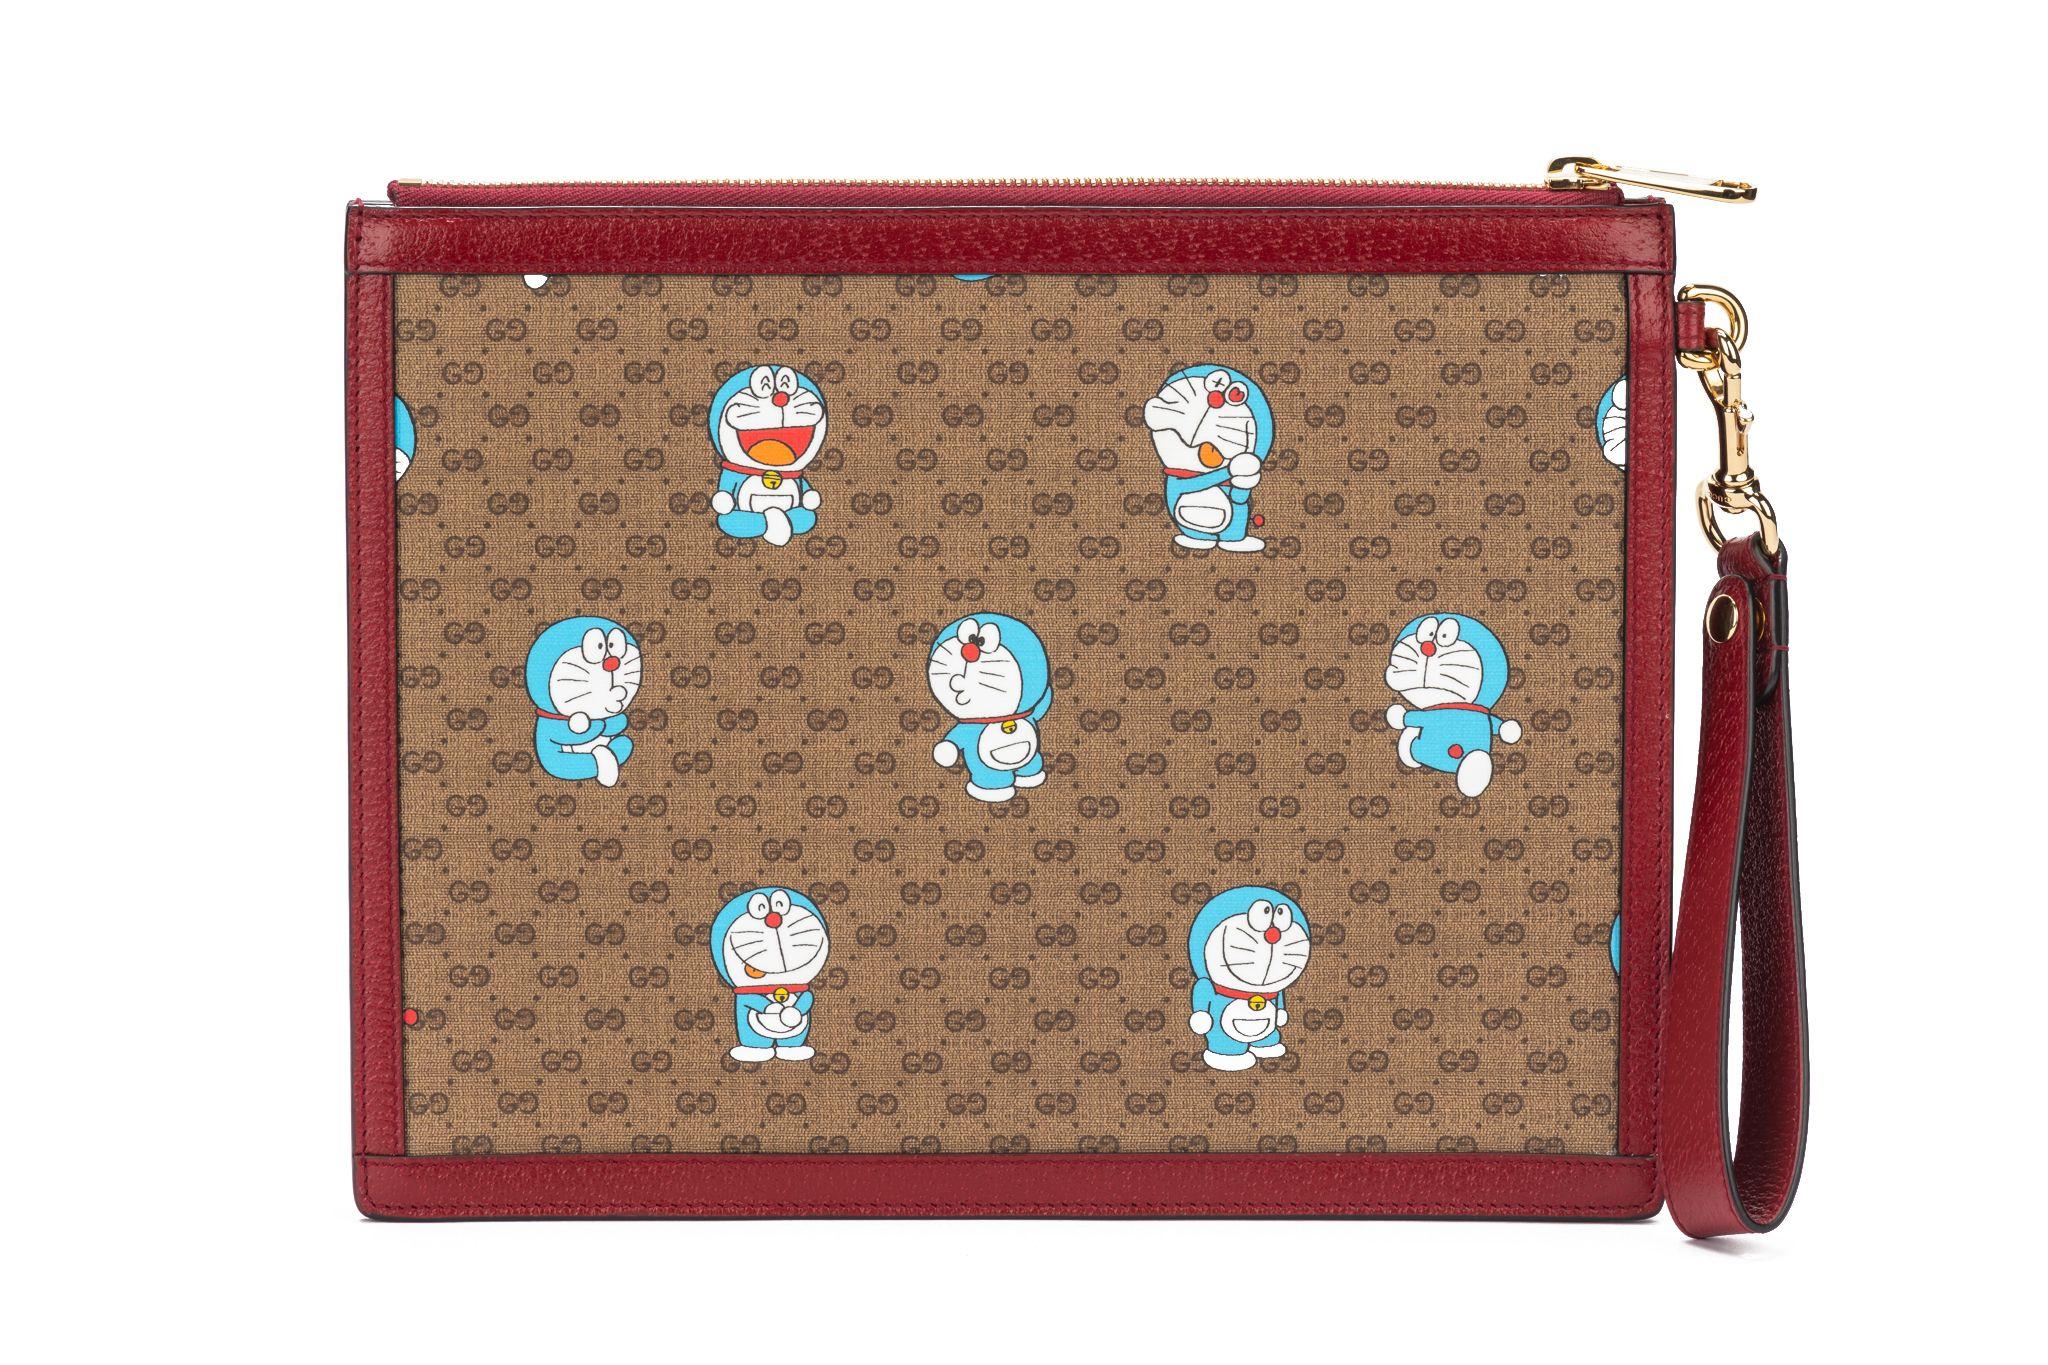 New Doraemon x Gucci Lim. Ed. Clutch In New Condition For Sale In West Hollywood, CA